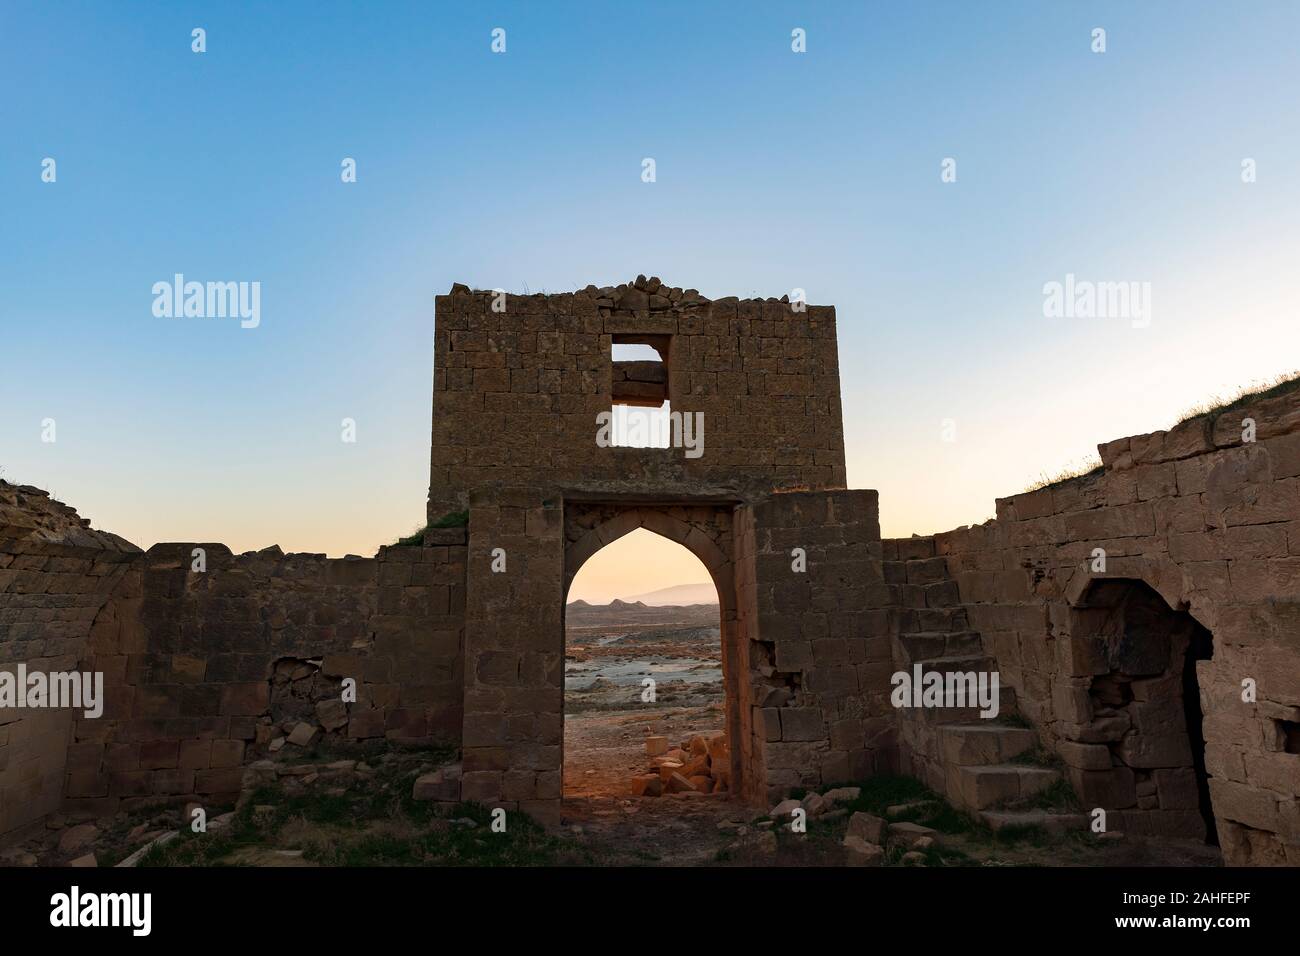 The main entrance to the ancient Caravanserai in the desert Stock Photo